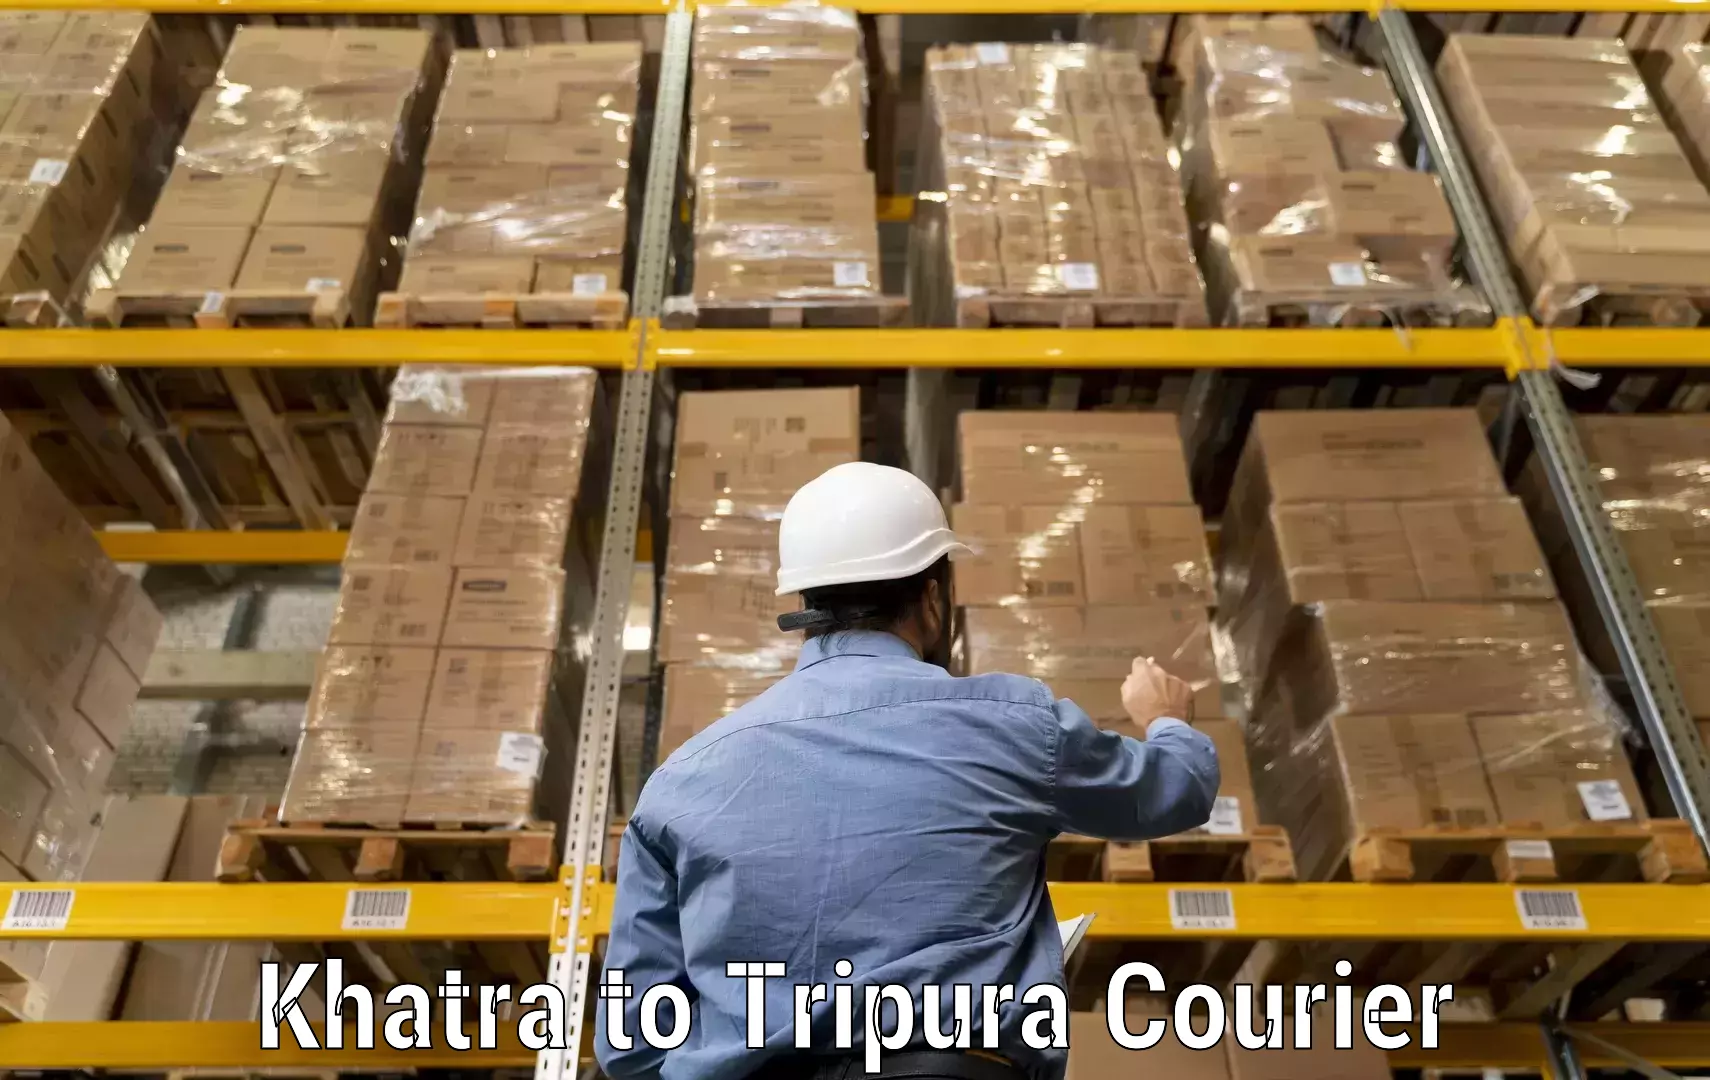 Global courier networks Khatra to Dharmanagar